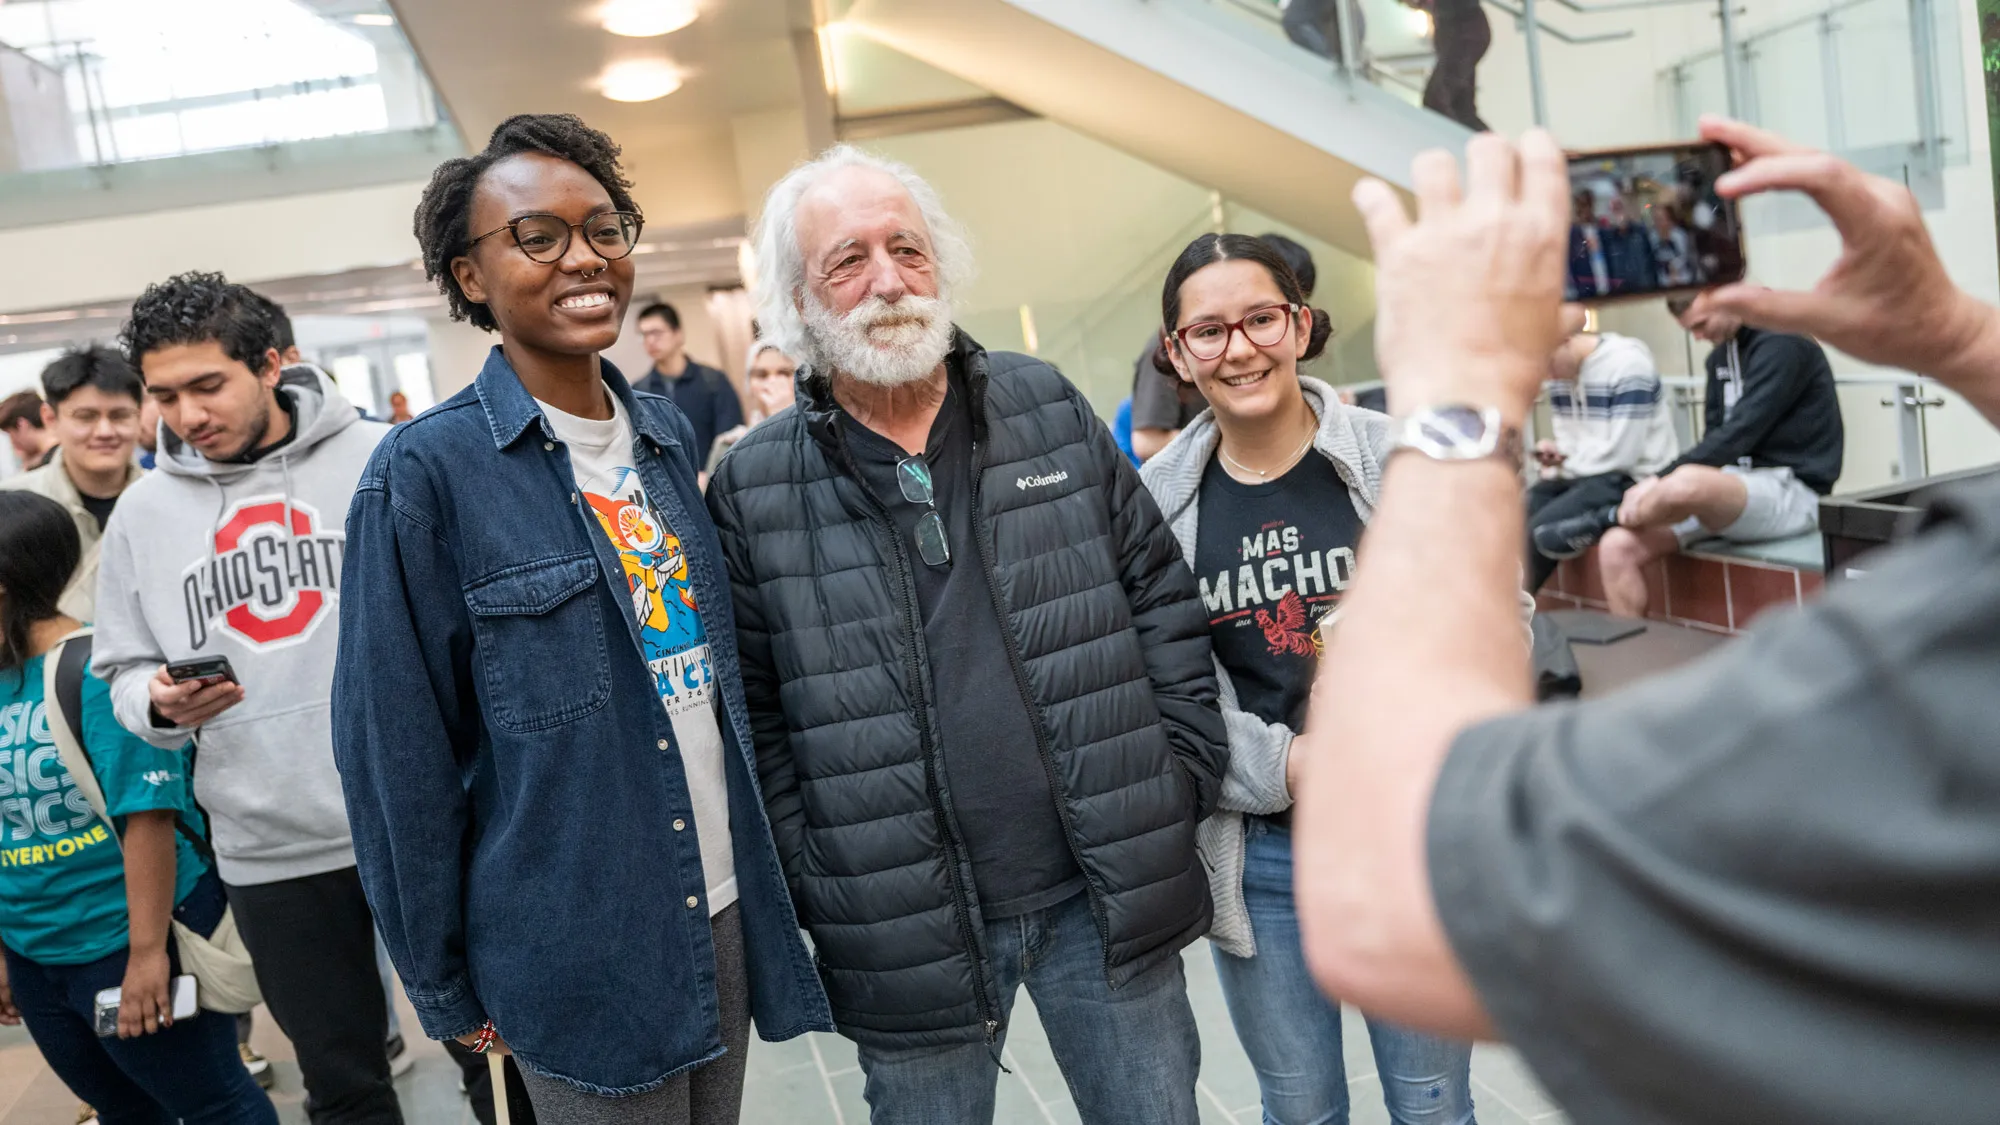 In a black T-shirt and insulated jacket, Agostini poses with two students for someone taking a cellphone photo. On his right, the black woman is taller than he is; on his other side, the woman (whose race isn’t clear) is as tall as his nose, so it looks like they’re standing in order of height. Both students wear glasses, T-shirts and smiles, and a line of students behind them wait their turn to meet Agostini. 